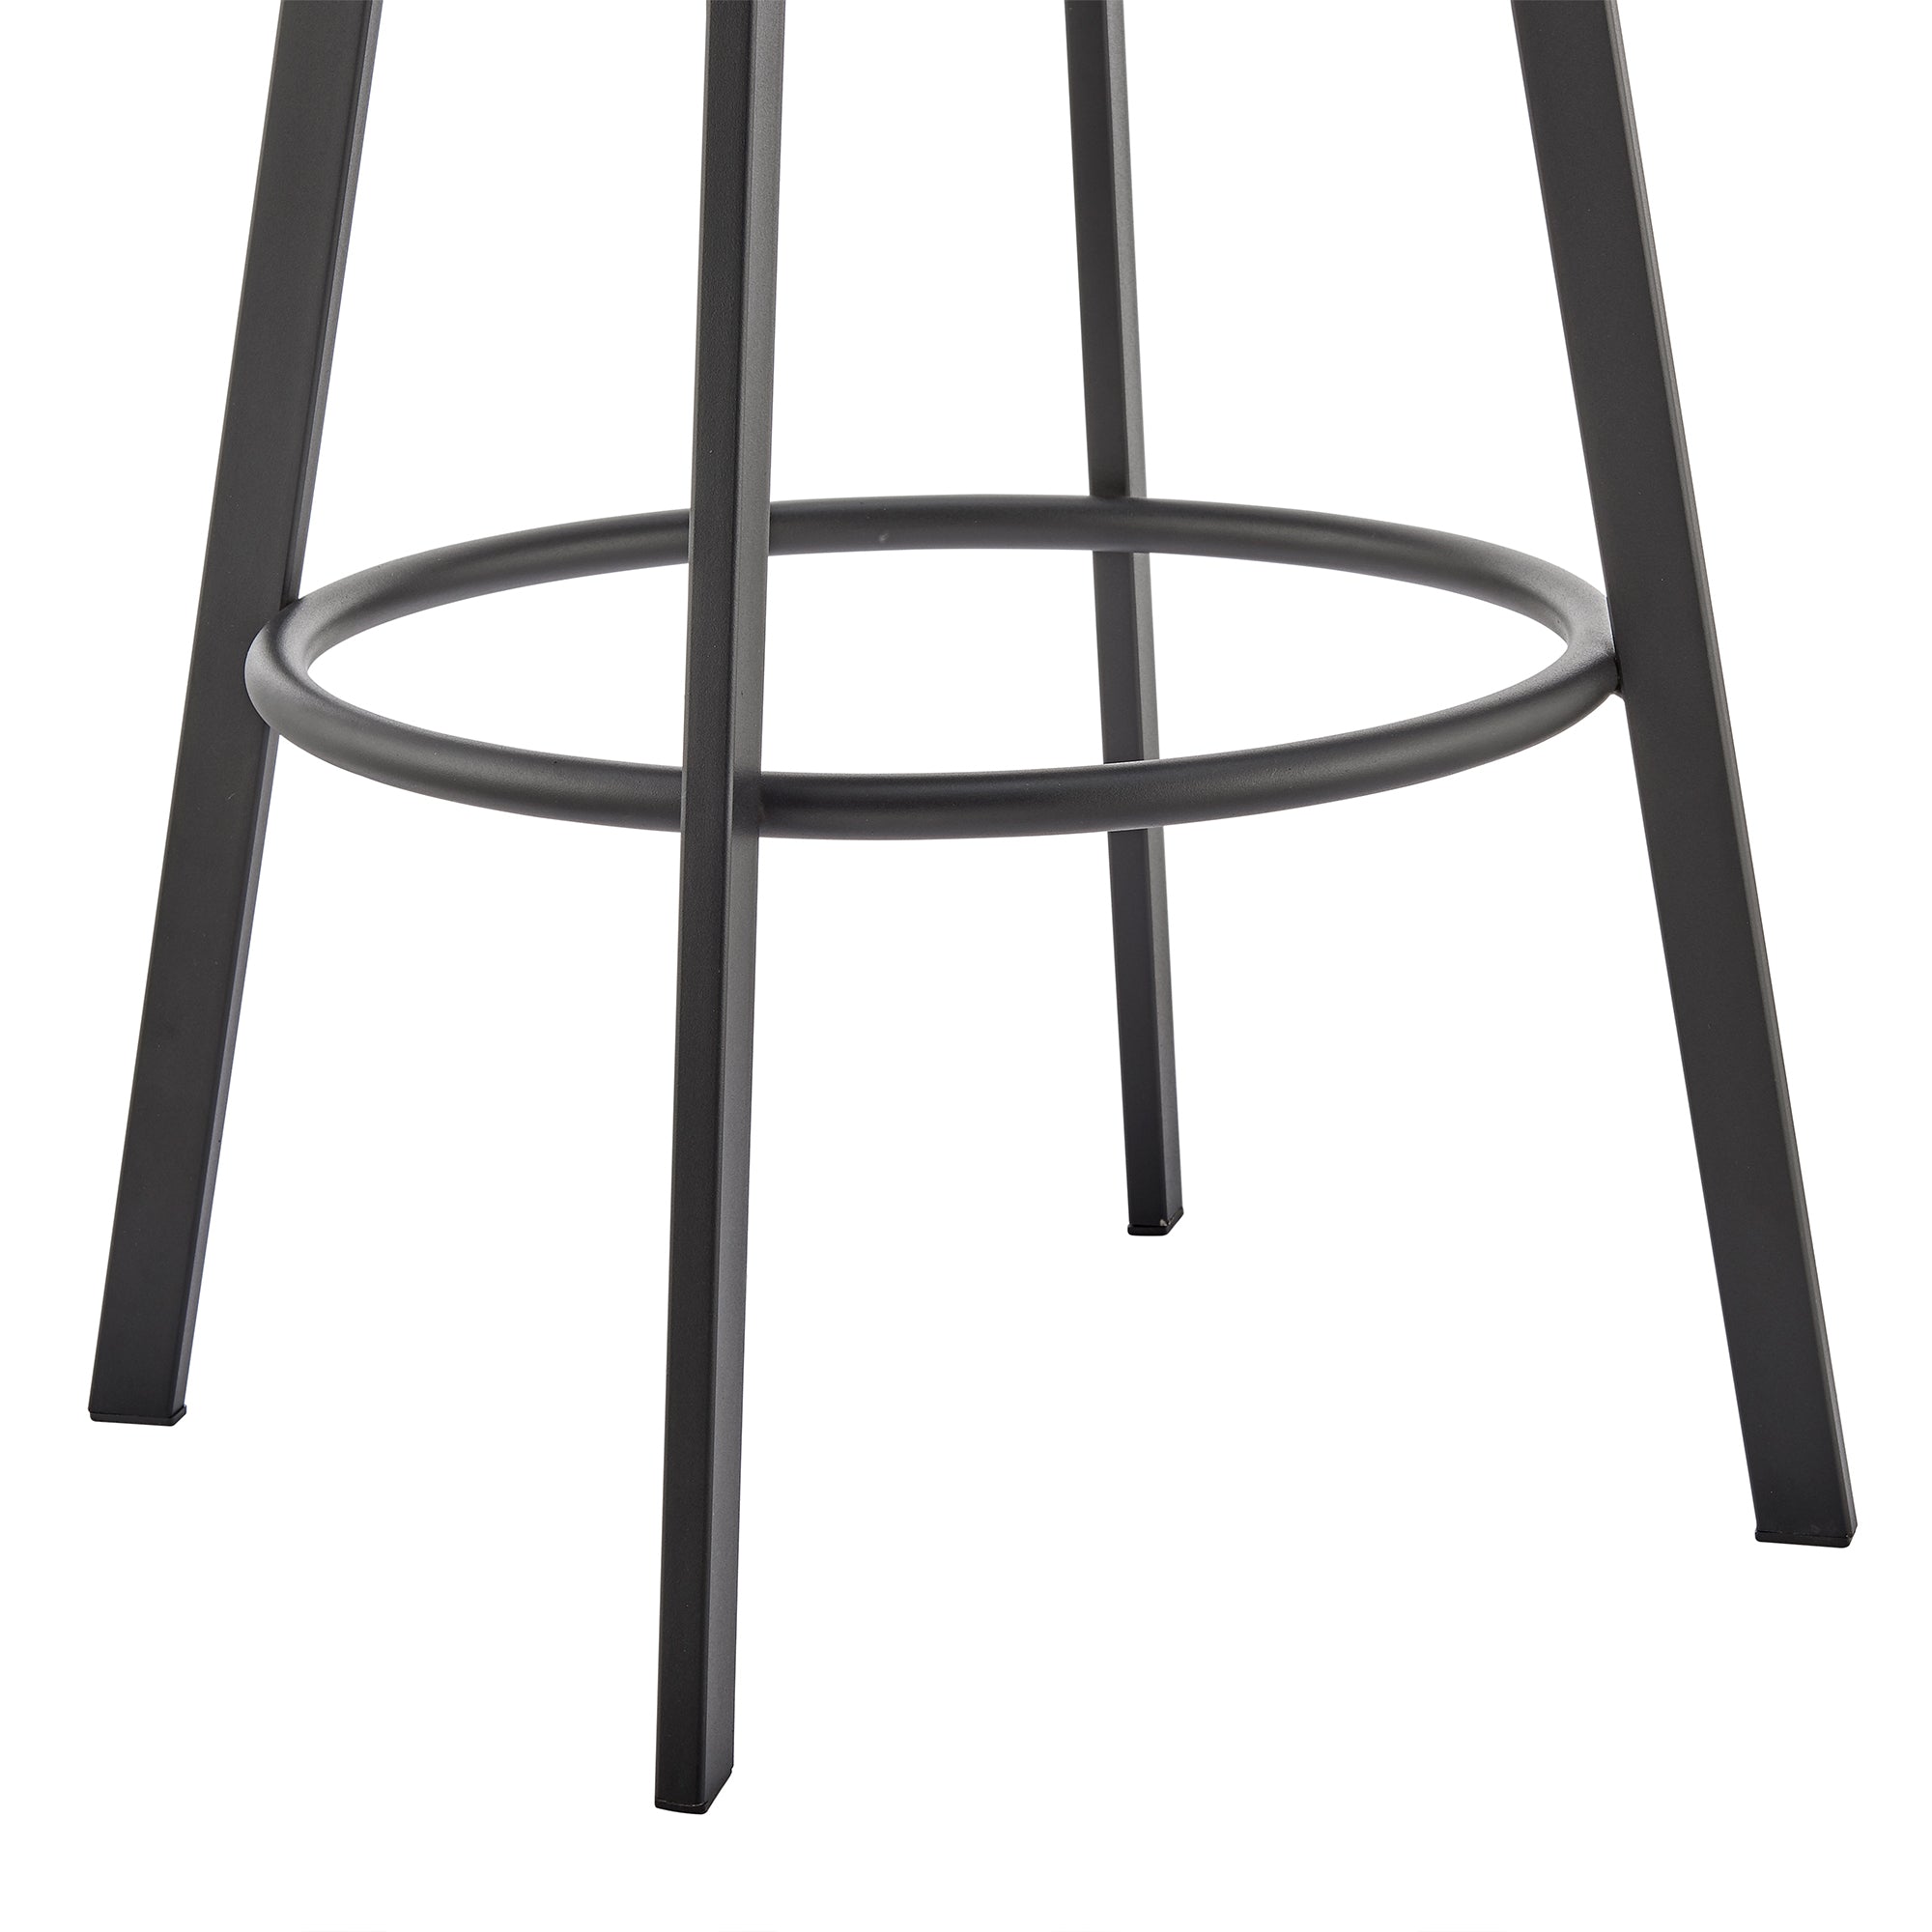 Armen Living - Noran Swivel Bar or Counter Stool in Faux Leather and Metal - 840254335776